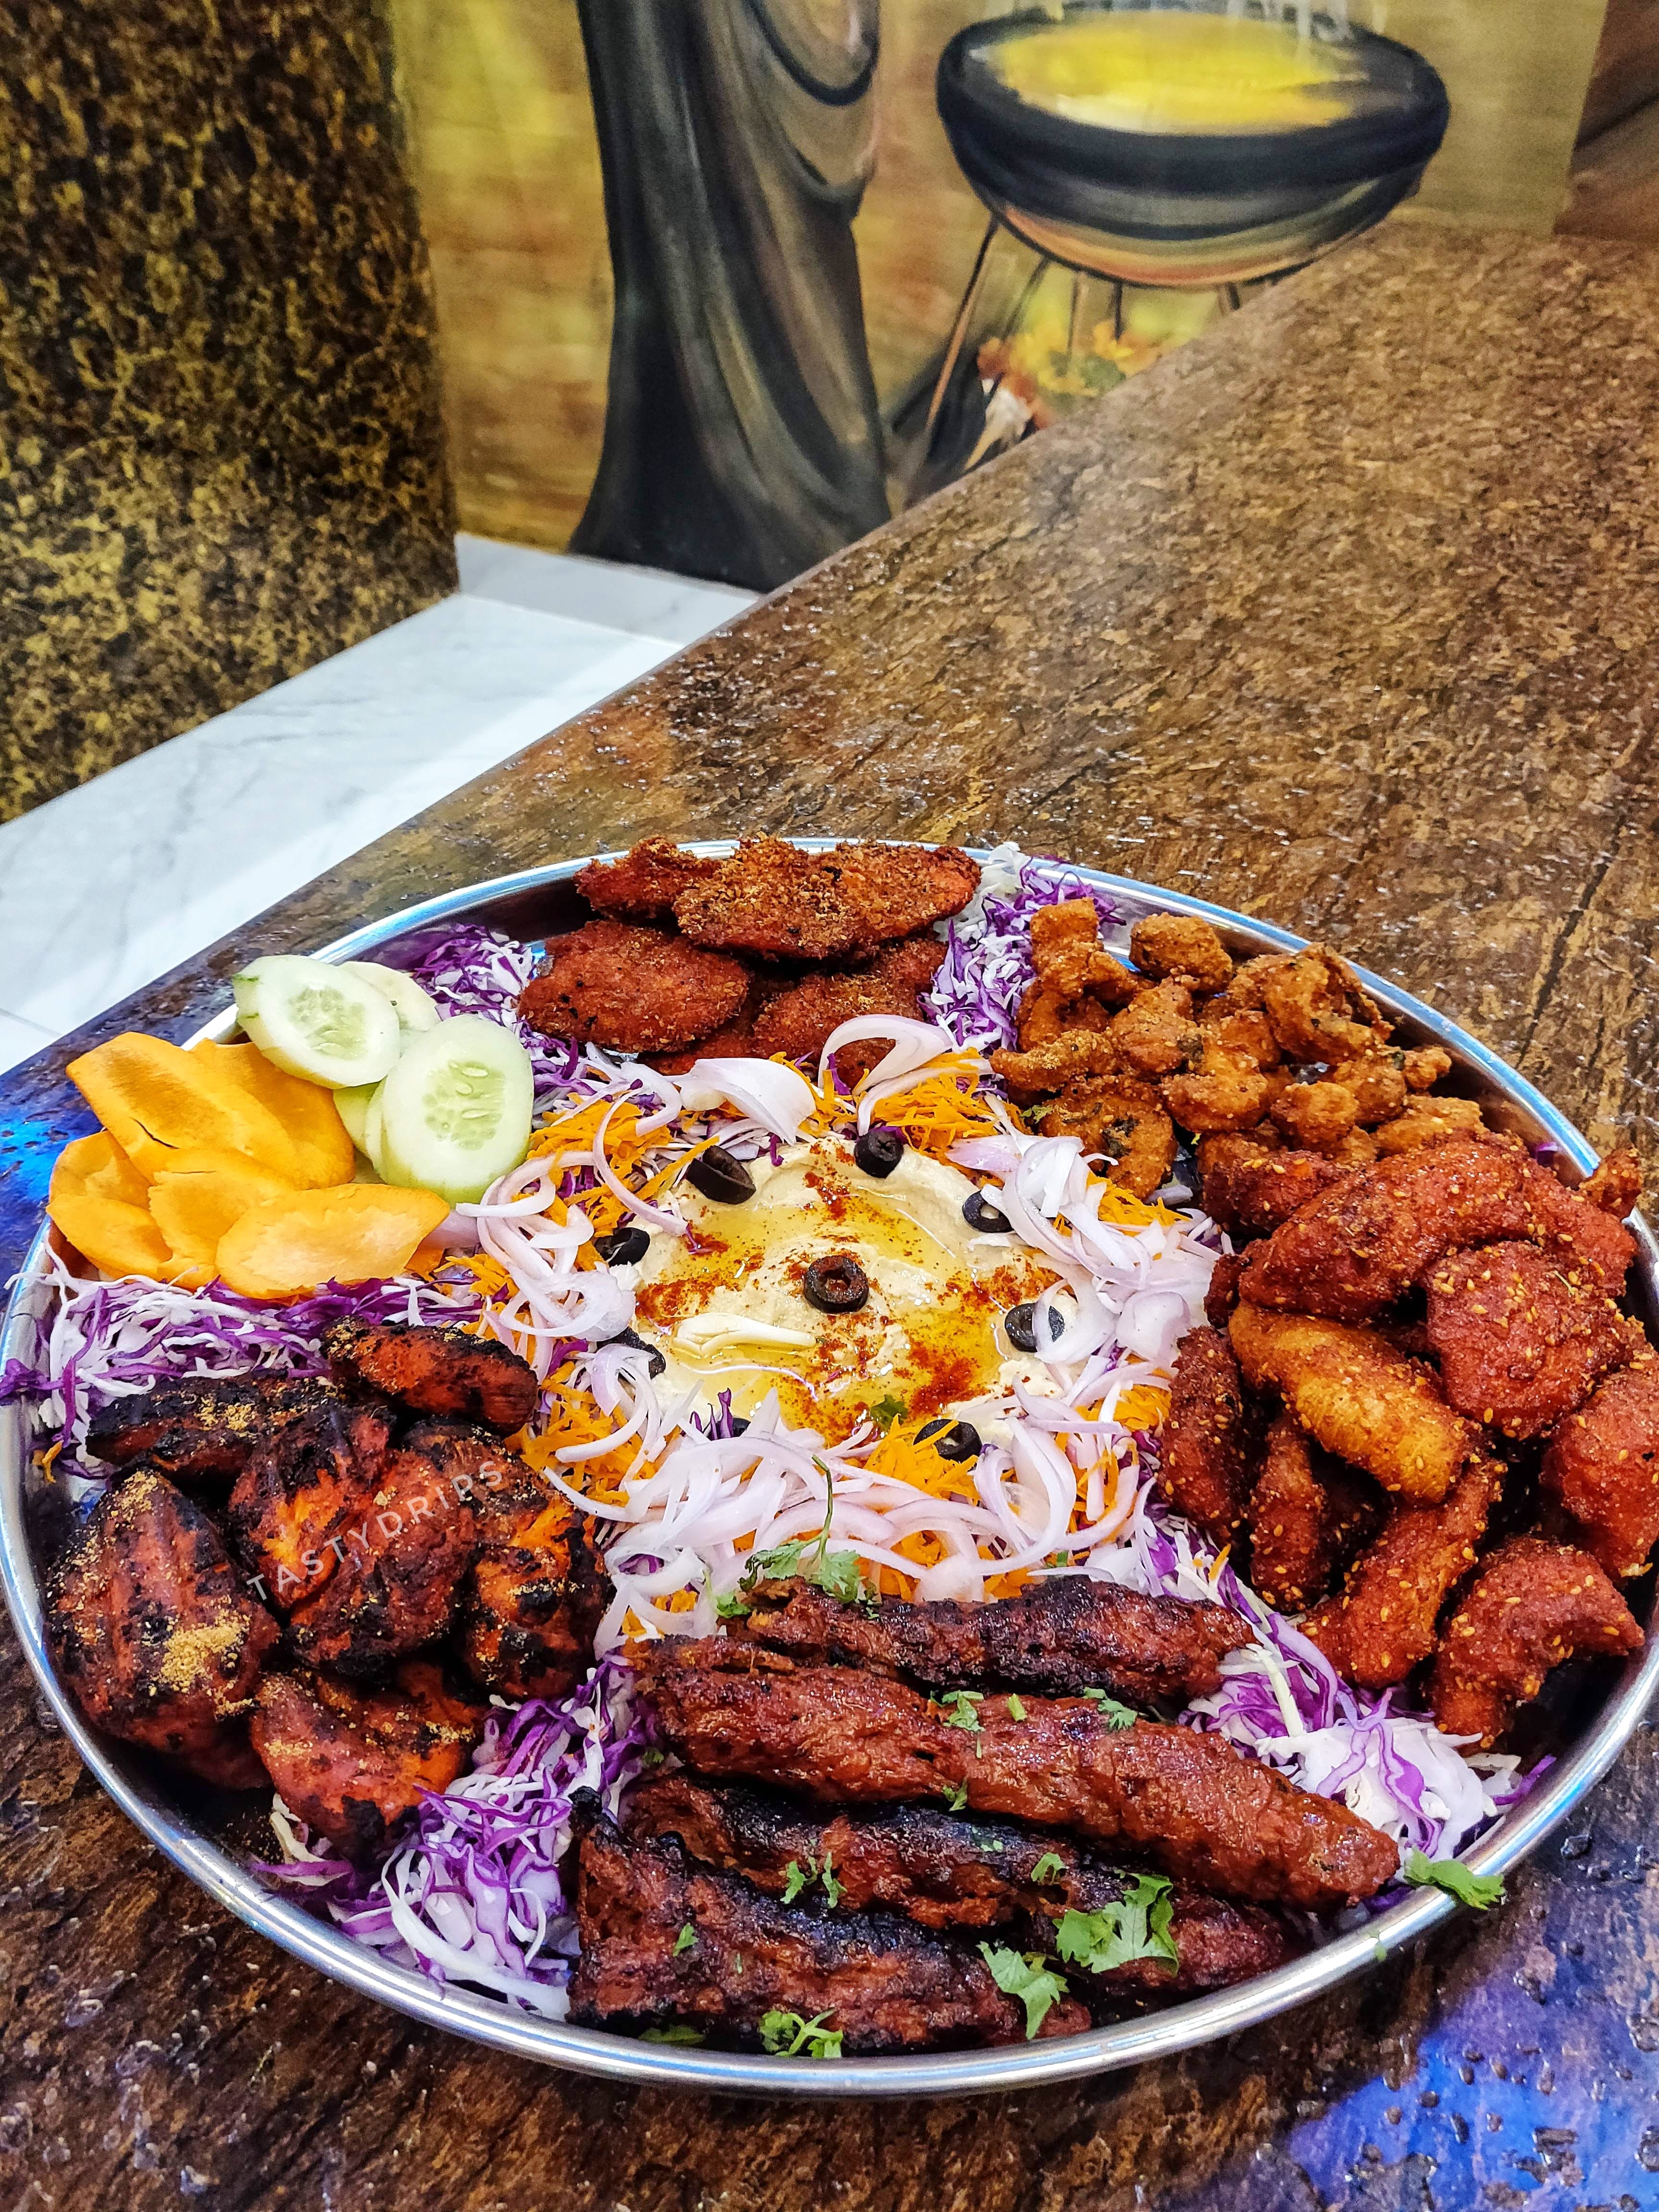 Dish,Food,Cuisine,Fried food,Ingredient,Meat,Produce,Mixed grill,Meal,Tandoori chicken